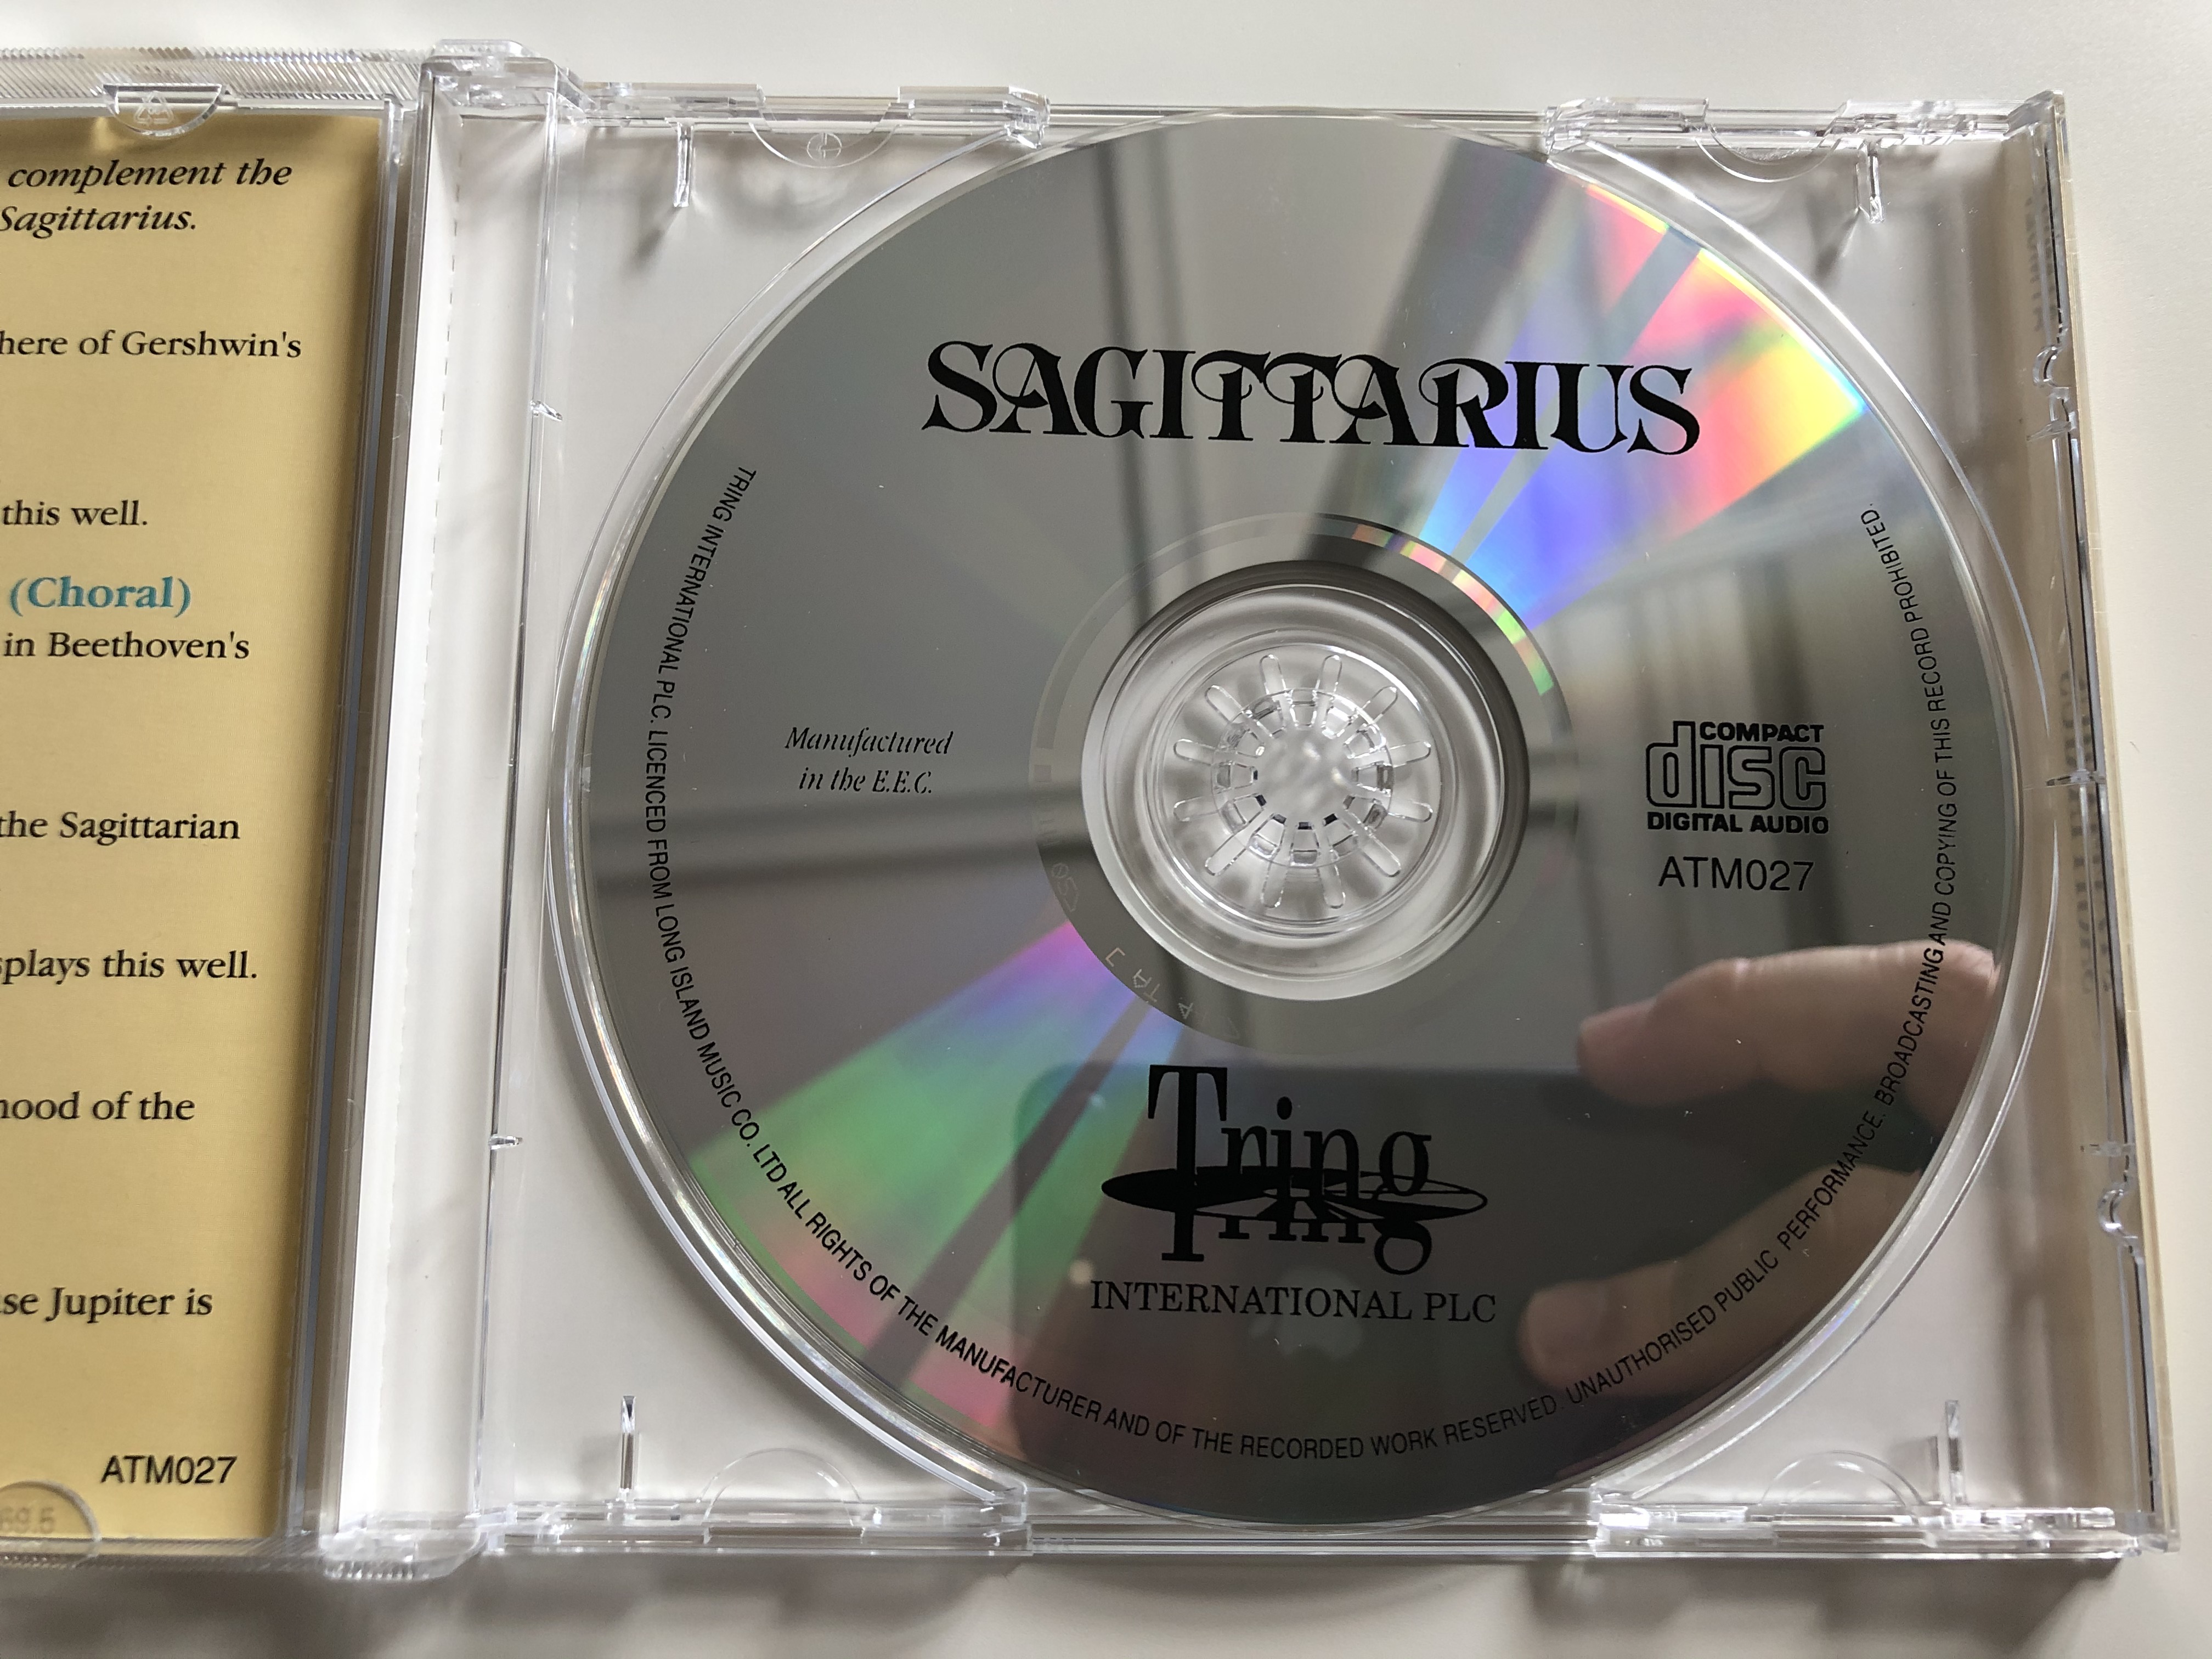 sagittarius-a-collection-of-music-and-an-outline-of-the-characteristics-of-those-born-under-the-sign-of-sagittarius-22-november-21-december-tring-international-plc-audio-cd-atm027-atm027-4-.jpg